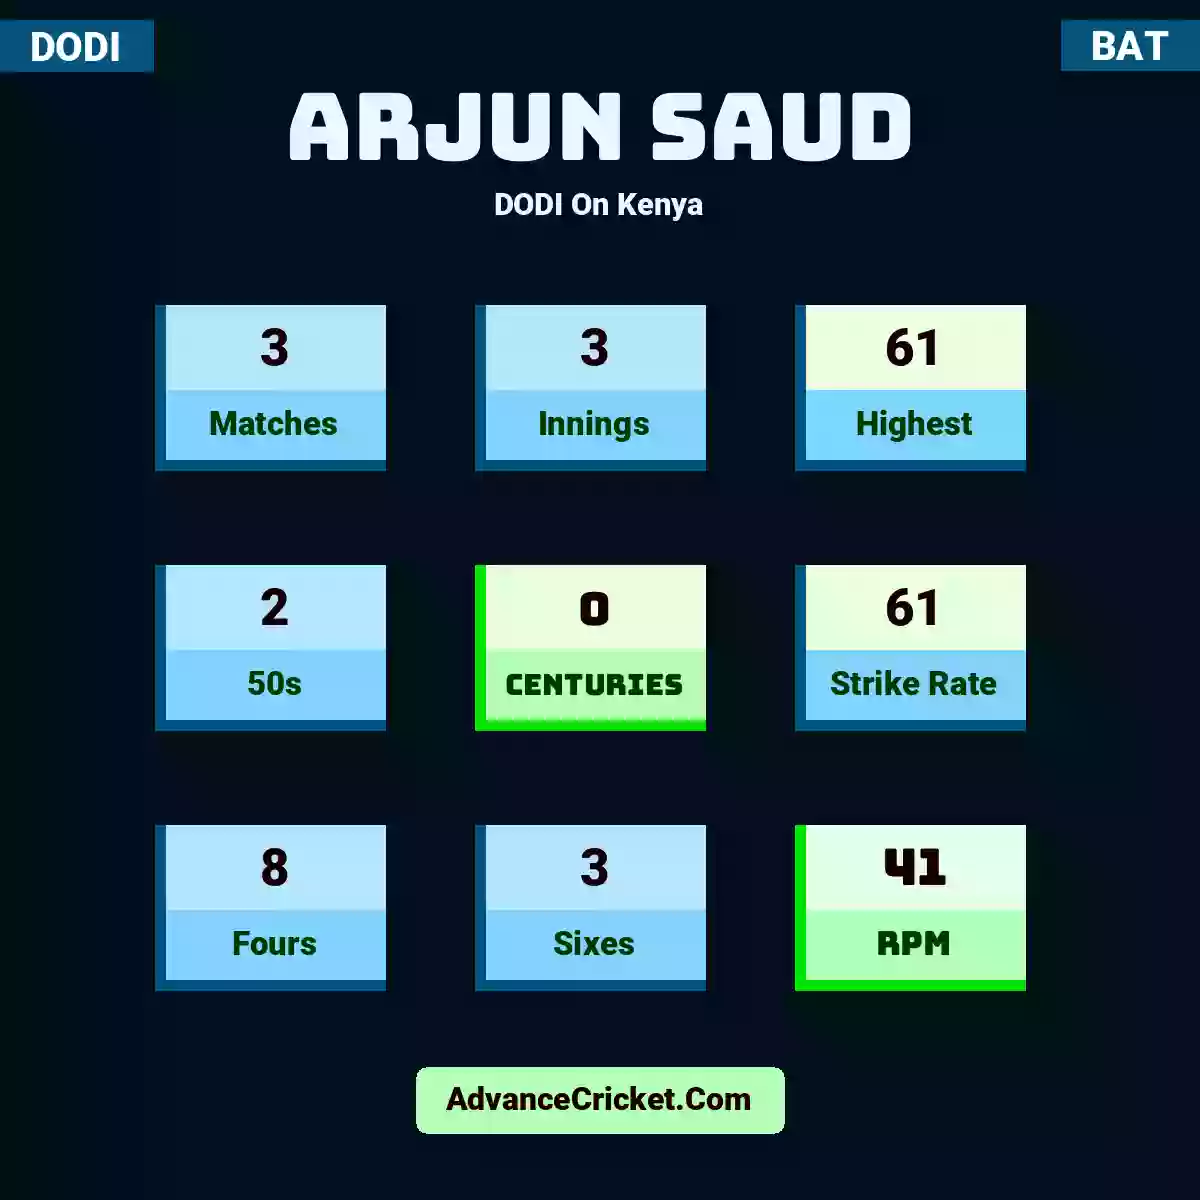 Arjun Saud DODI  On Kenya, Arjun Saud played 3 matches, scored 61 runs as highest, 2 half-centuries, and 0 centuries, with a strike rate of 61. A.Saud hit 8 fours and 3 sixes, with an RPM of 41.